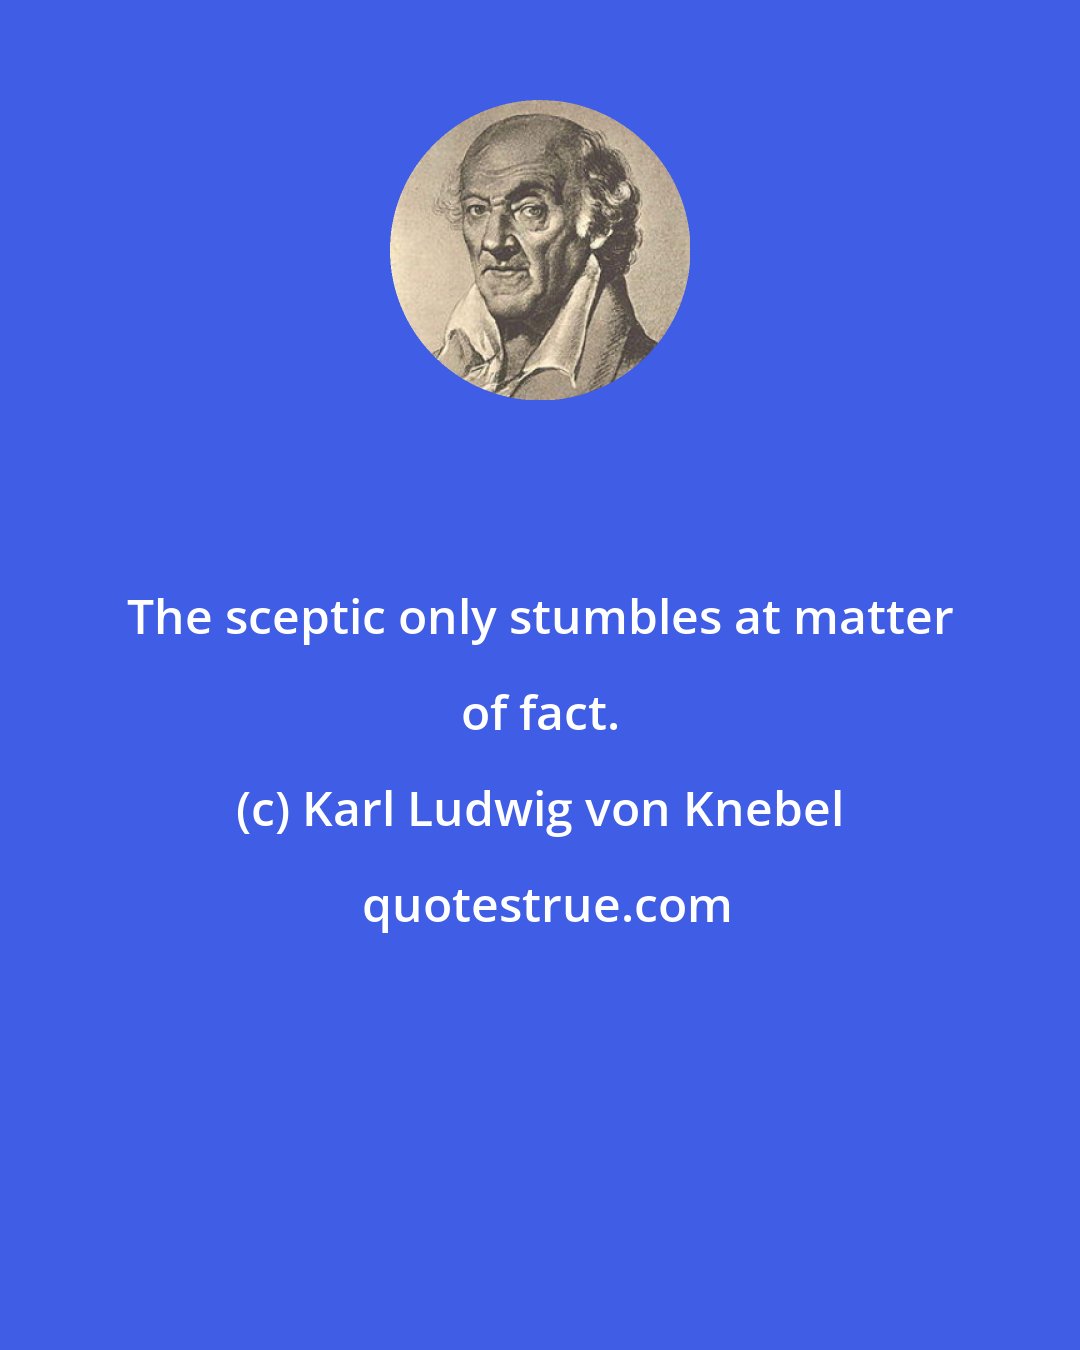 Karl Ludwig von Knebel: The sceptic only stumbles at matter of fact.